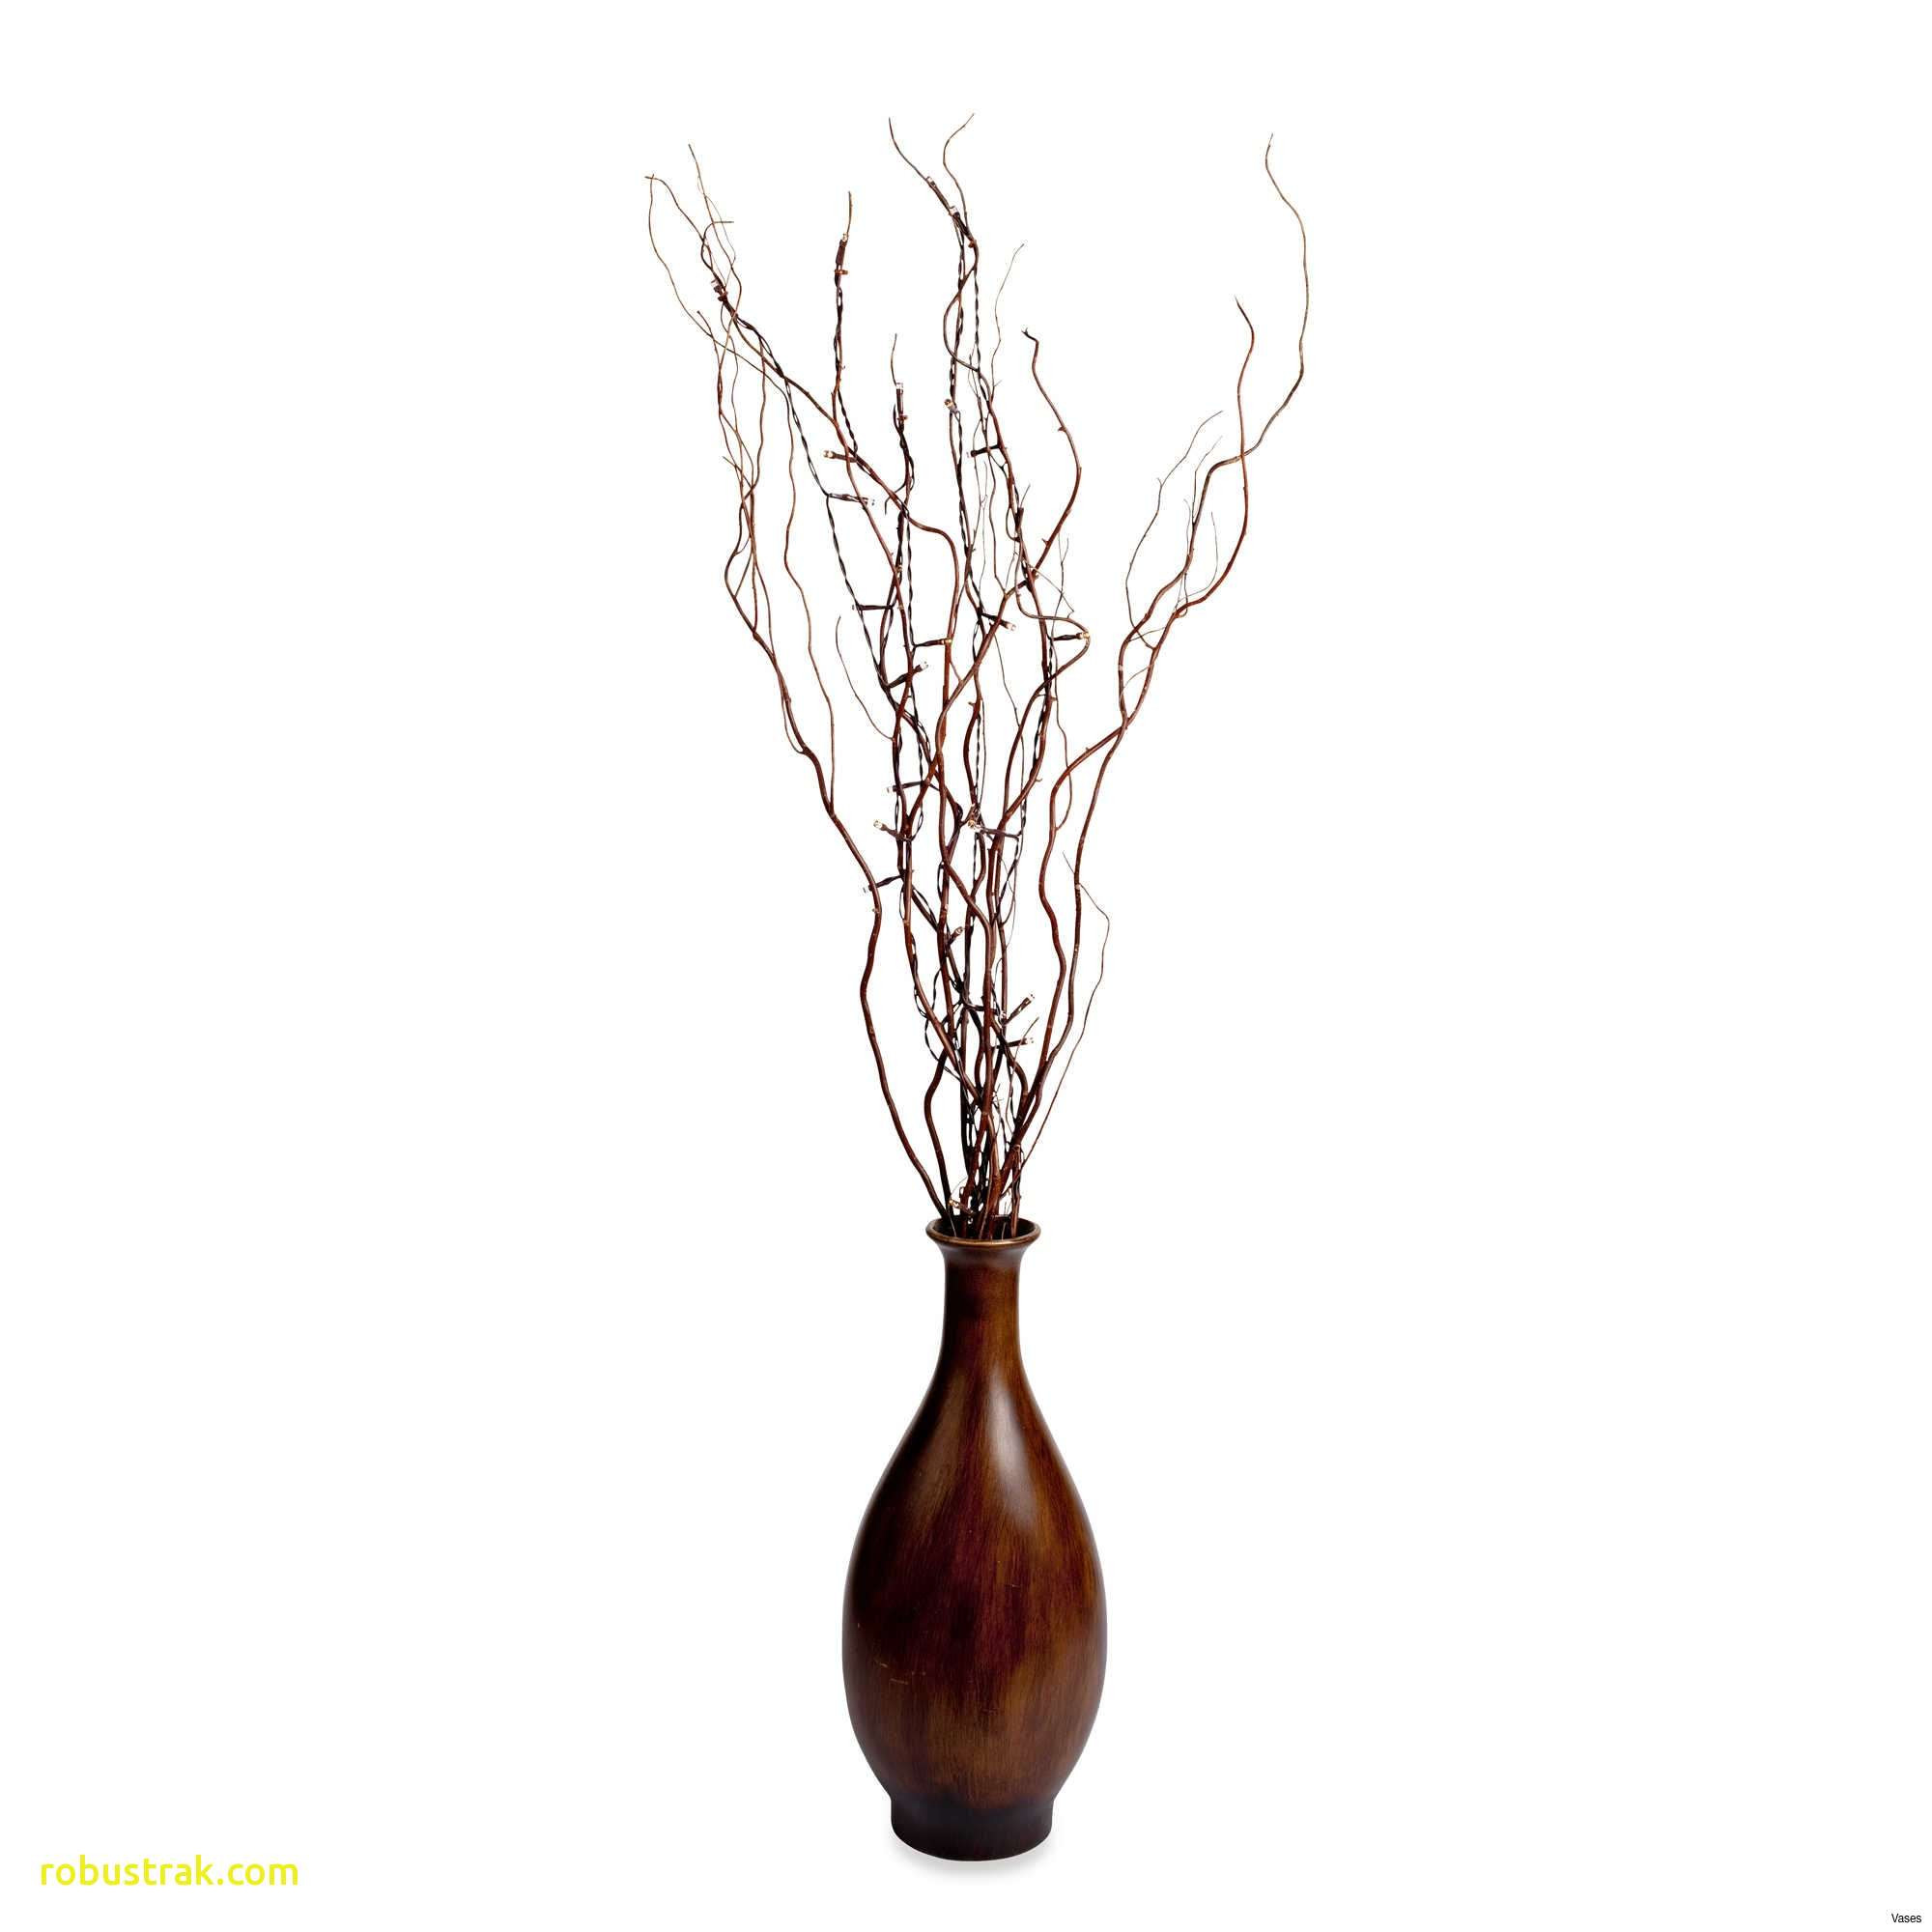 14 Elegant Tall Brown Vase 2024 free download tall brown vase of inspirational decor sticks in a vase home design ideas within brown lighted branches matched with home accessories ideas vase sticks luxury standing tableh vases decorativ